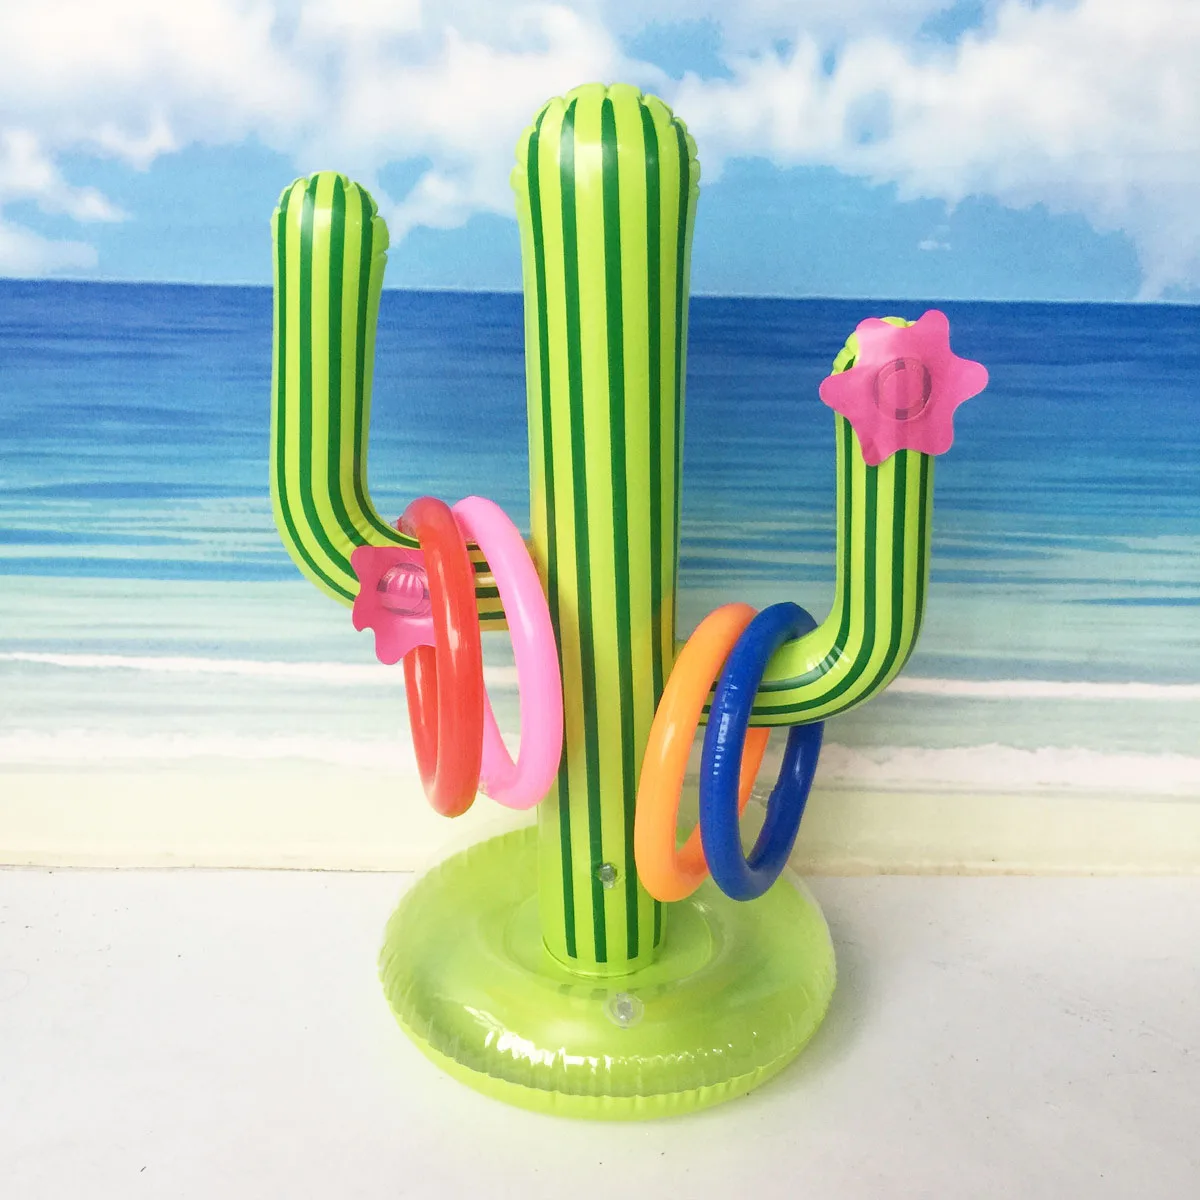 Cactus Swimming Pool Ring Toss Games Inflatable Pool Toys With 4 Ring Summer - £9.68 GBP